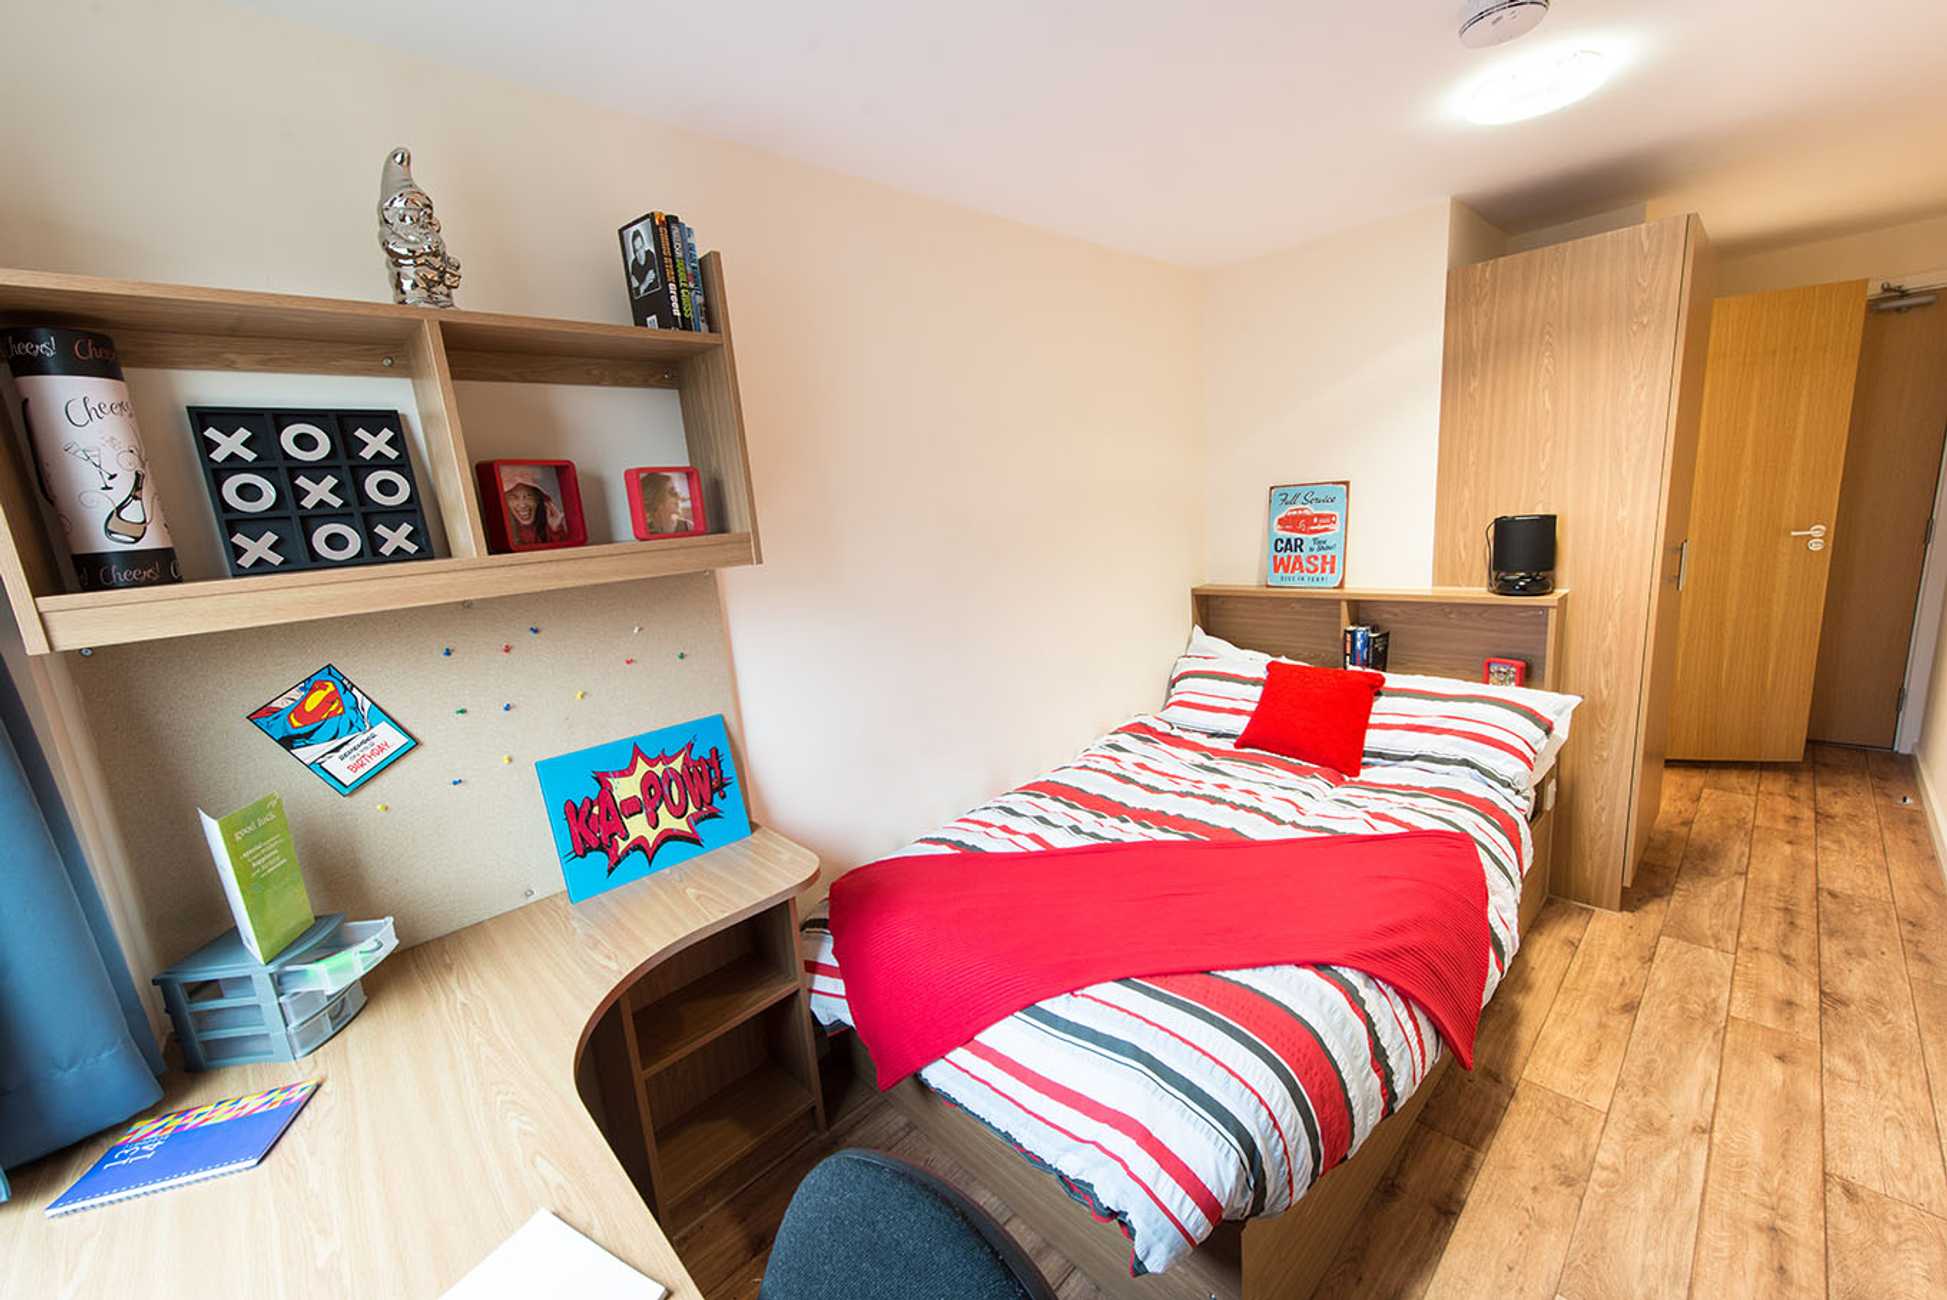 Student bedroom inside accommodation building